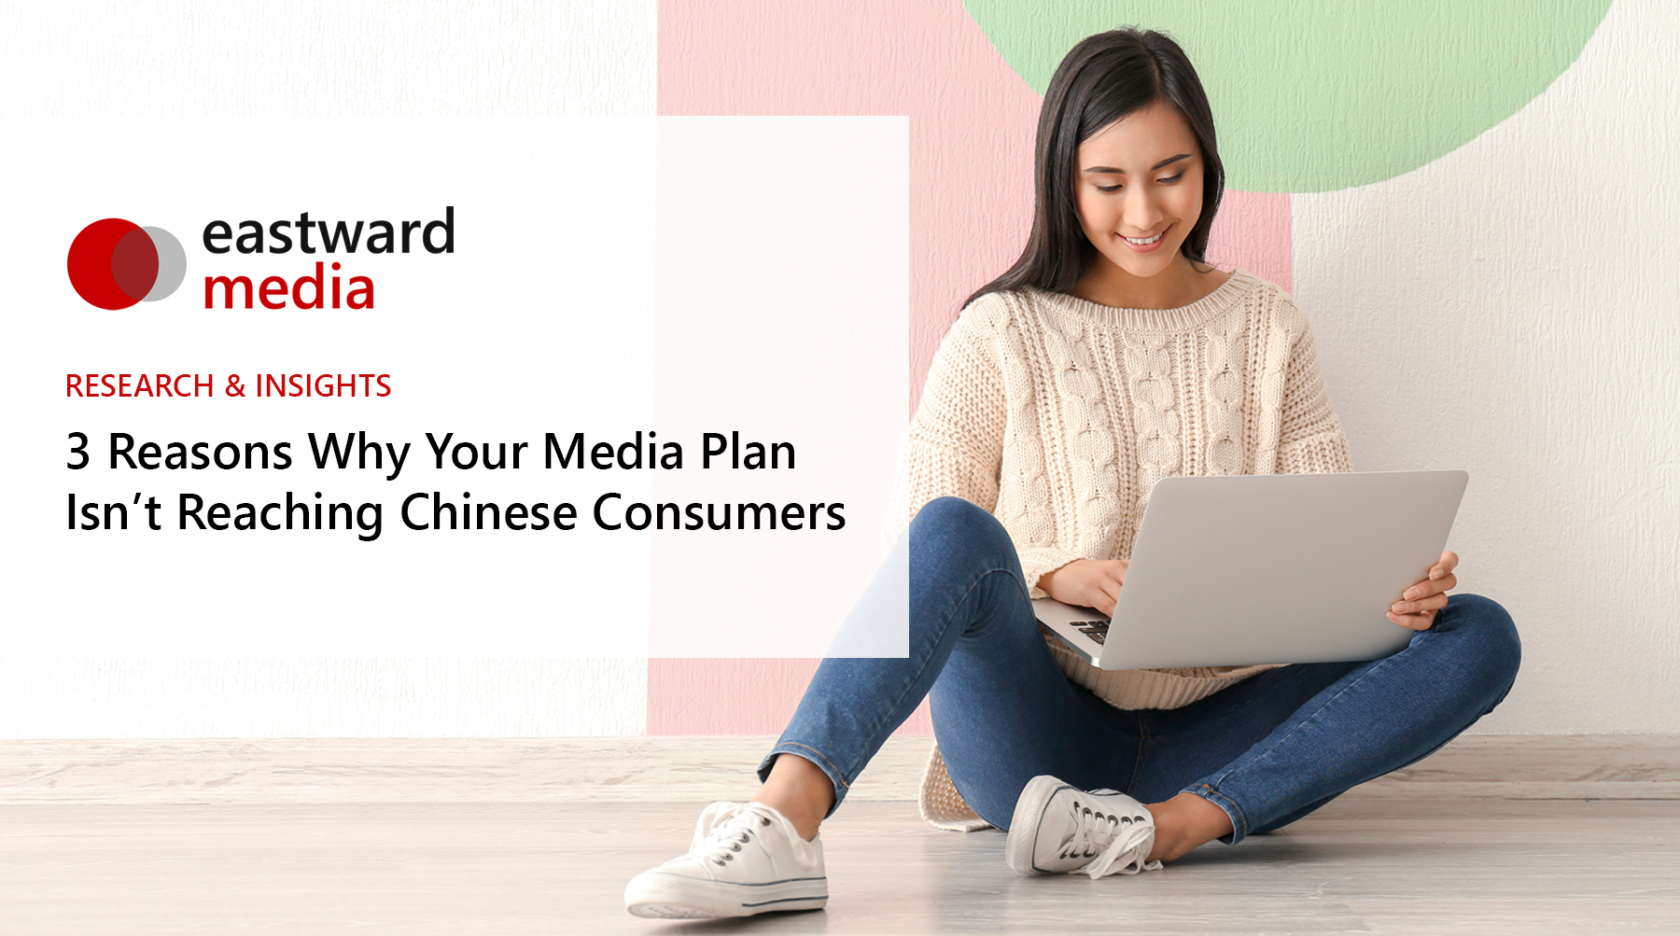 3 Reasons Why Your Media Plan Isn't Reaching Chinese Consumers